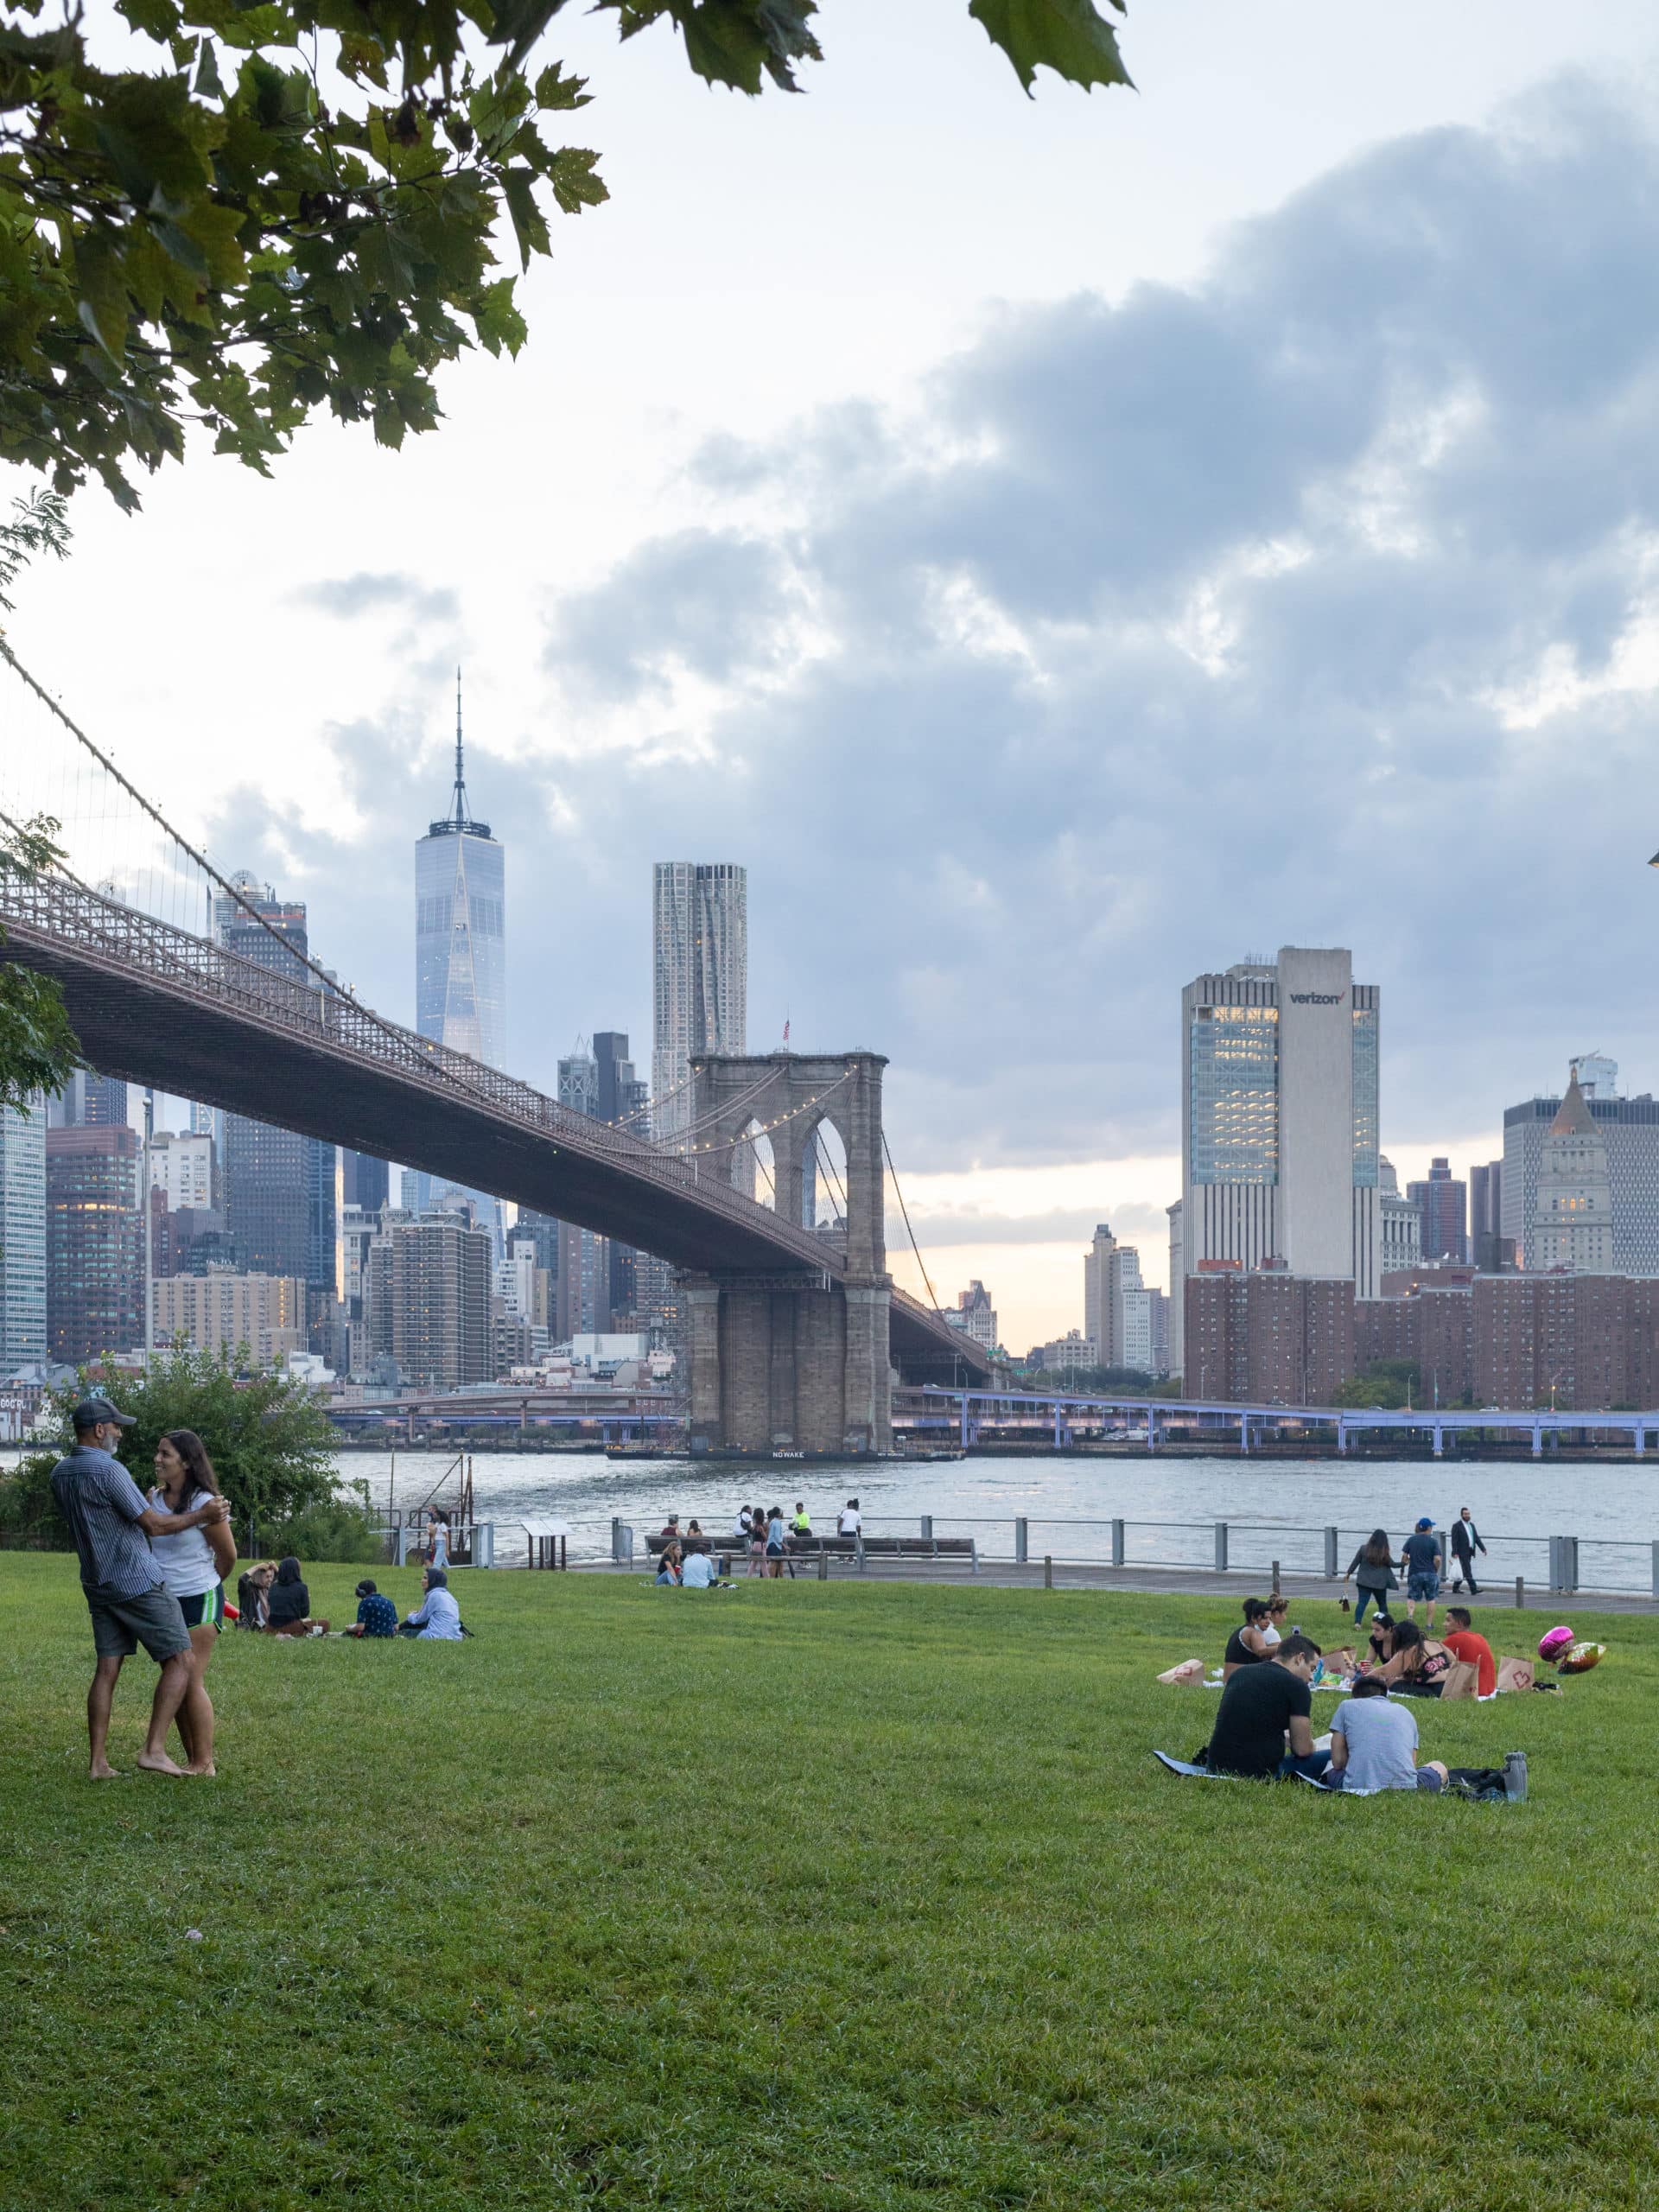 People sitting on Empire Fulton Ferry Lawn at dusk with view of the Brooklyn Bridge and lower Manhattan.